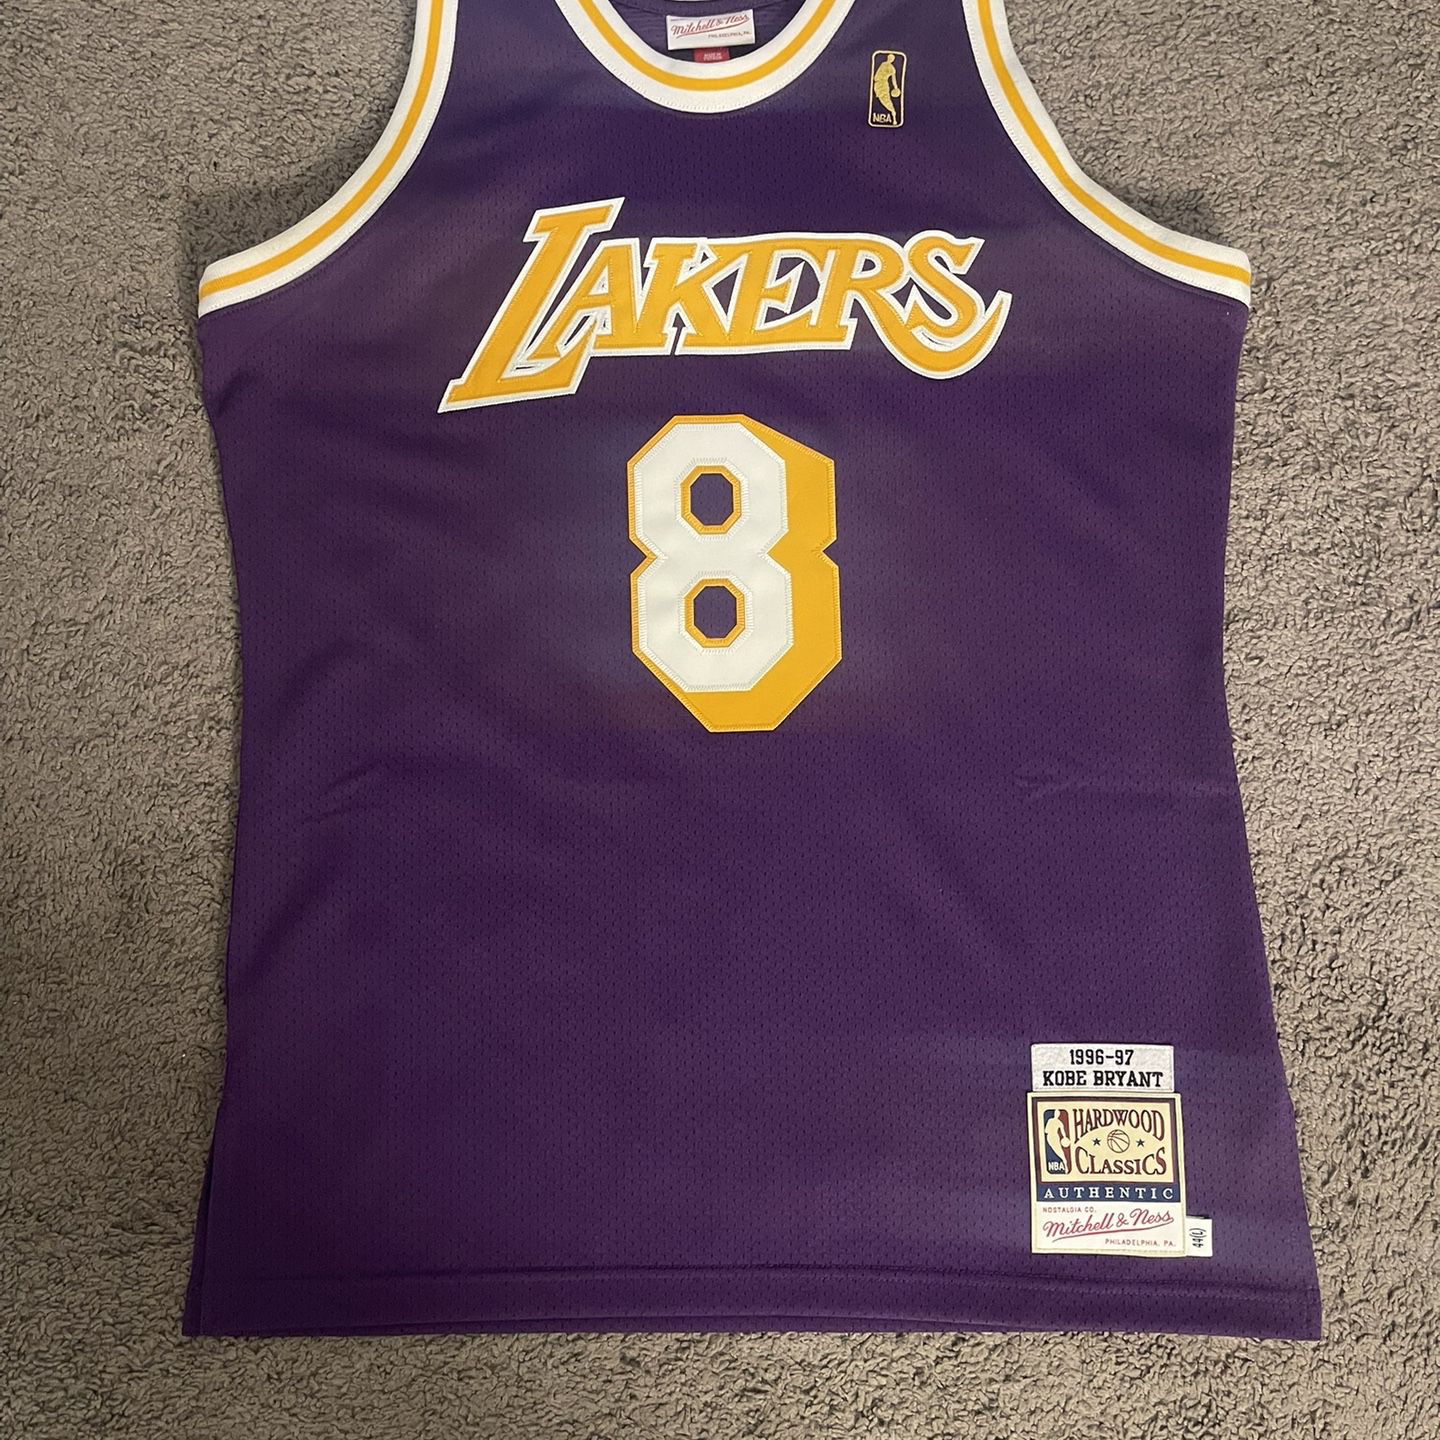 Authentic Kobe Bryant Jersey - Price Is Negotiable 